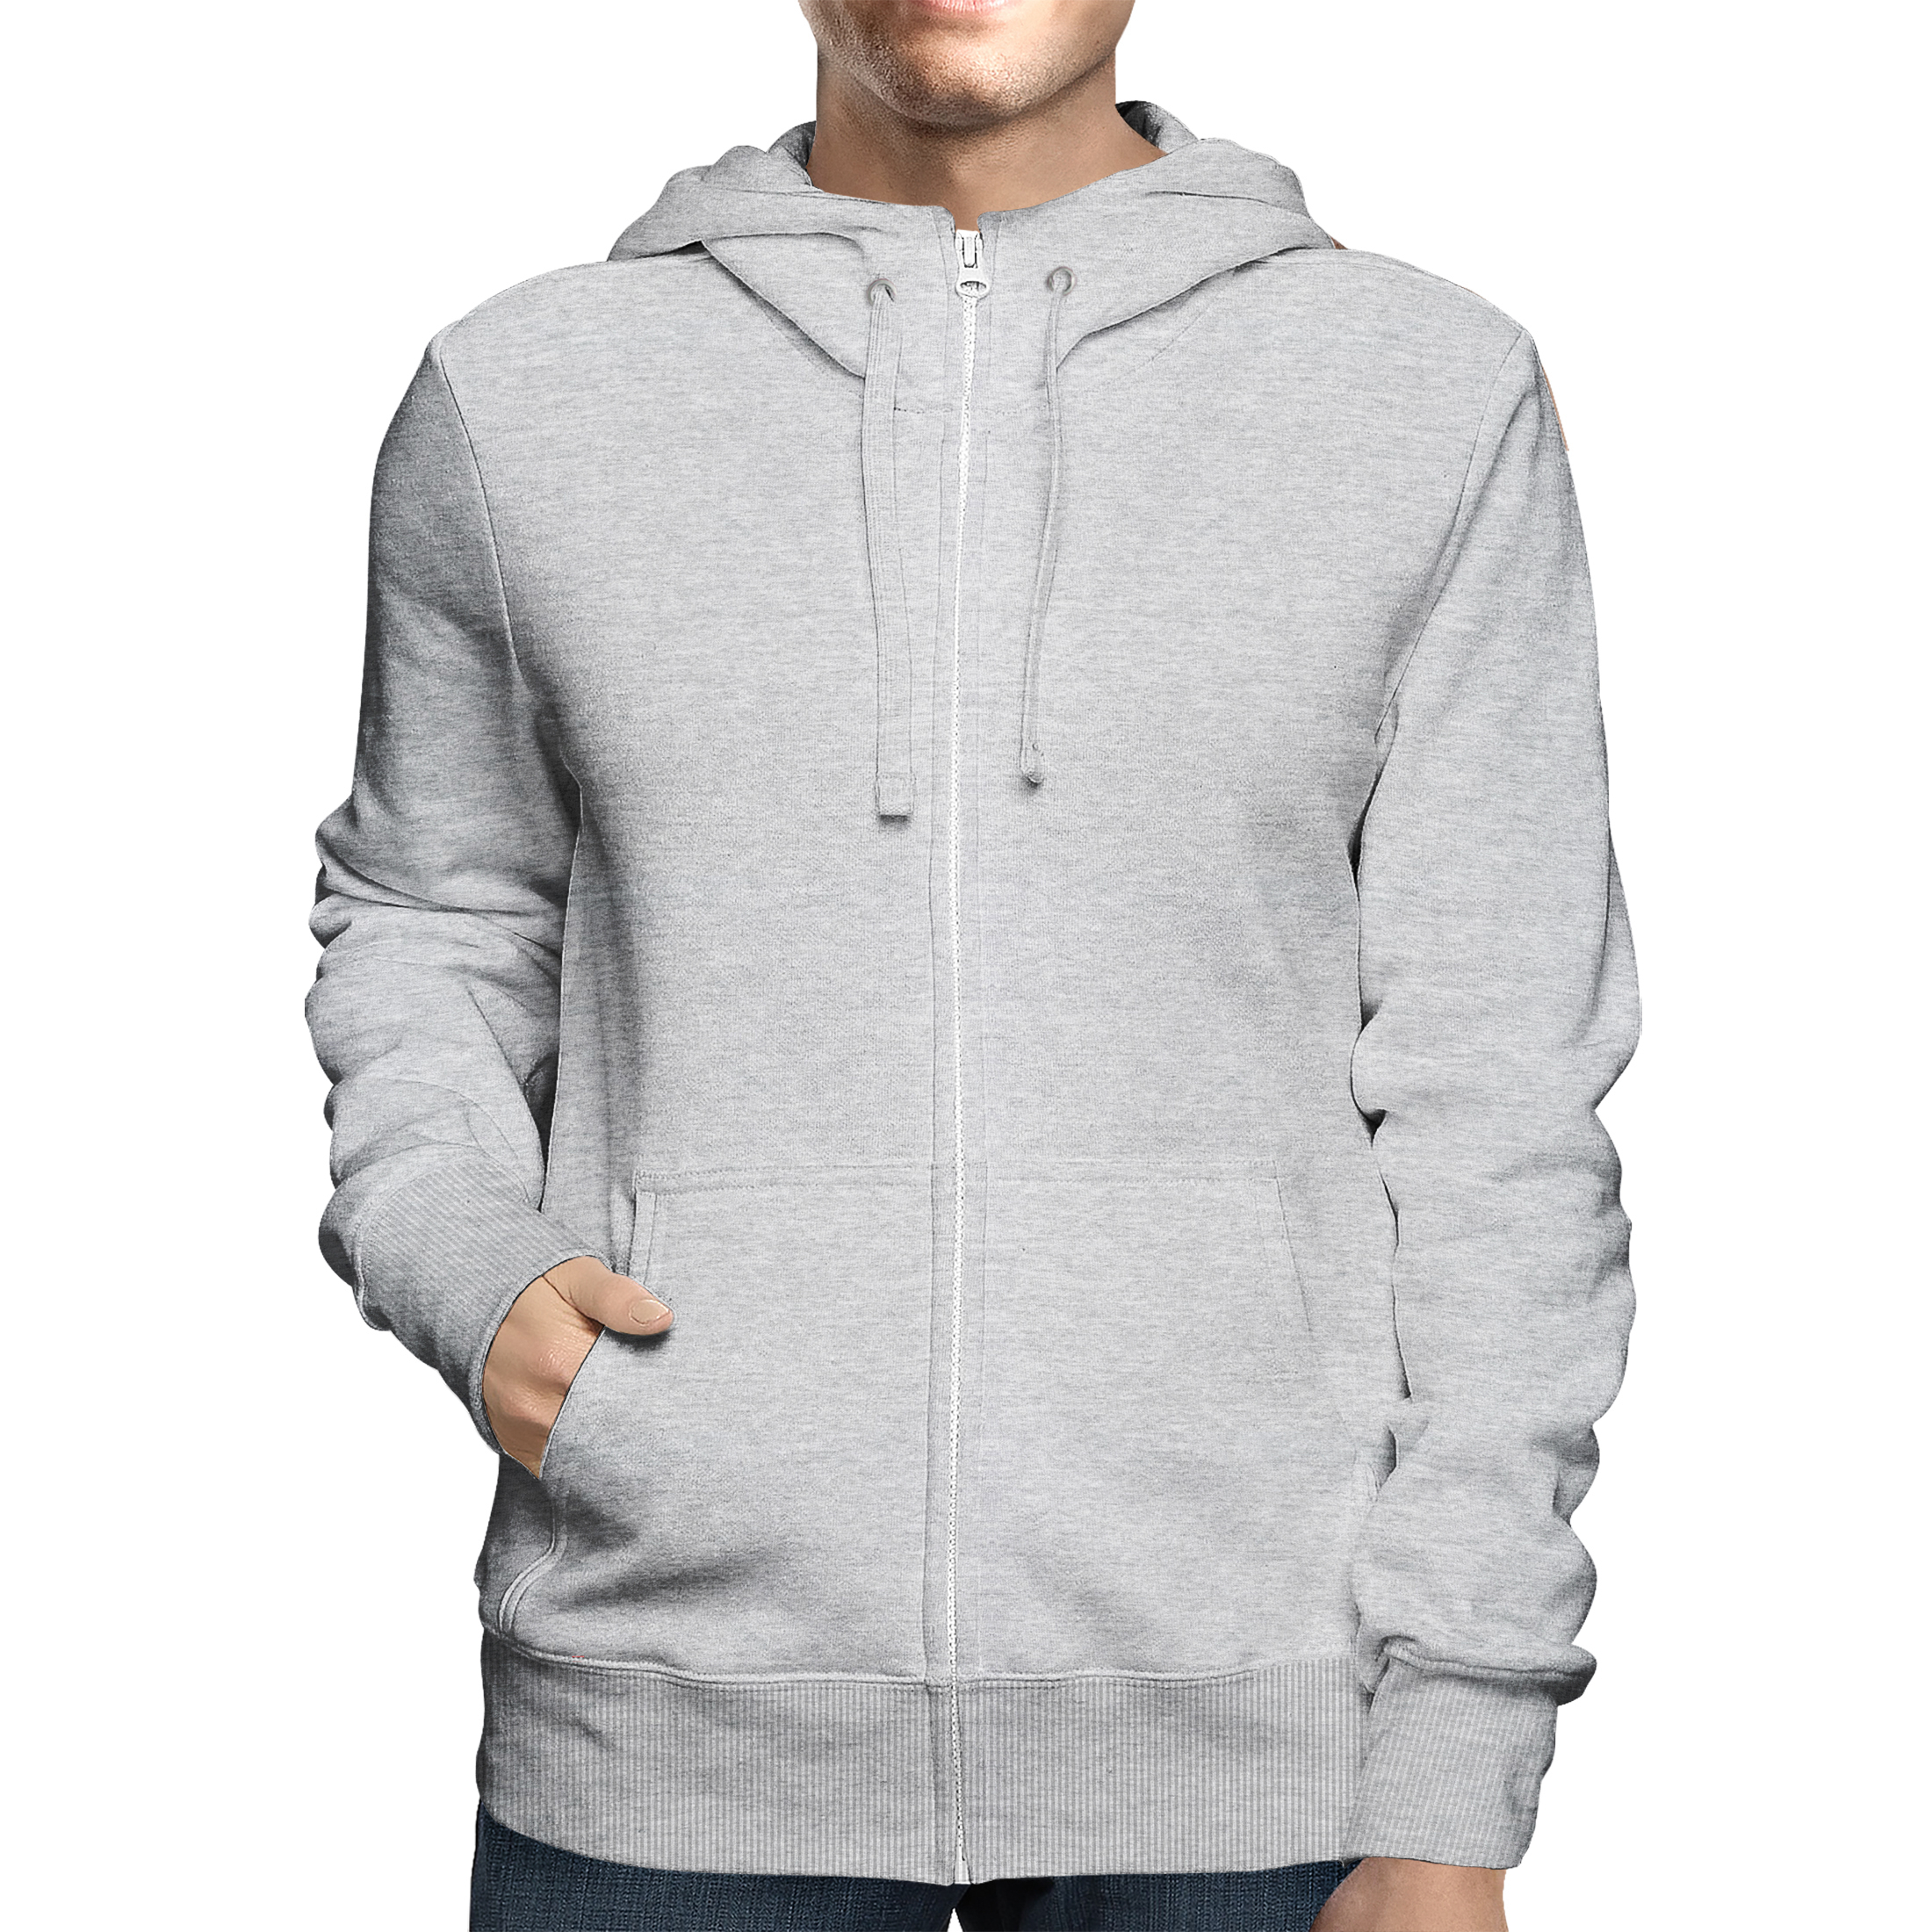 2-Pack: Men's Full Zip Up Fleece-Lined Hoodie Sweatshirt (Big & Tall Size Available) - Gray, Small